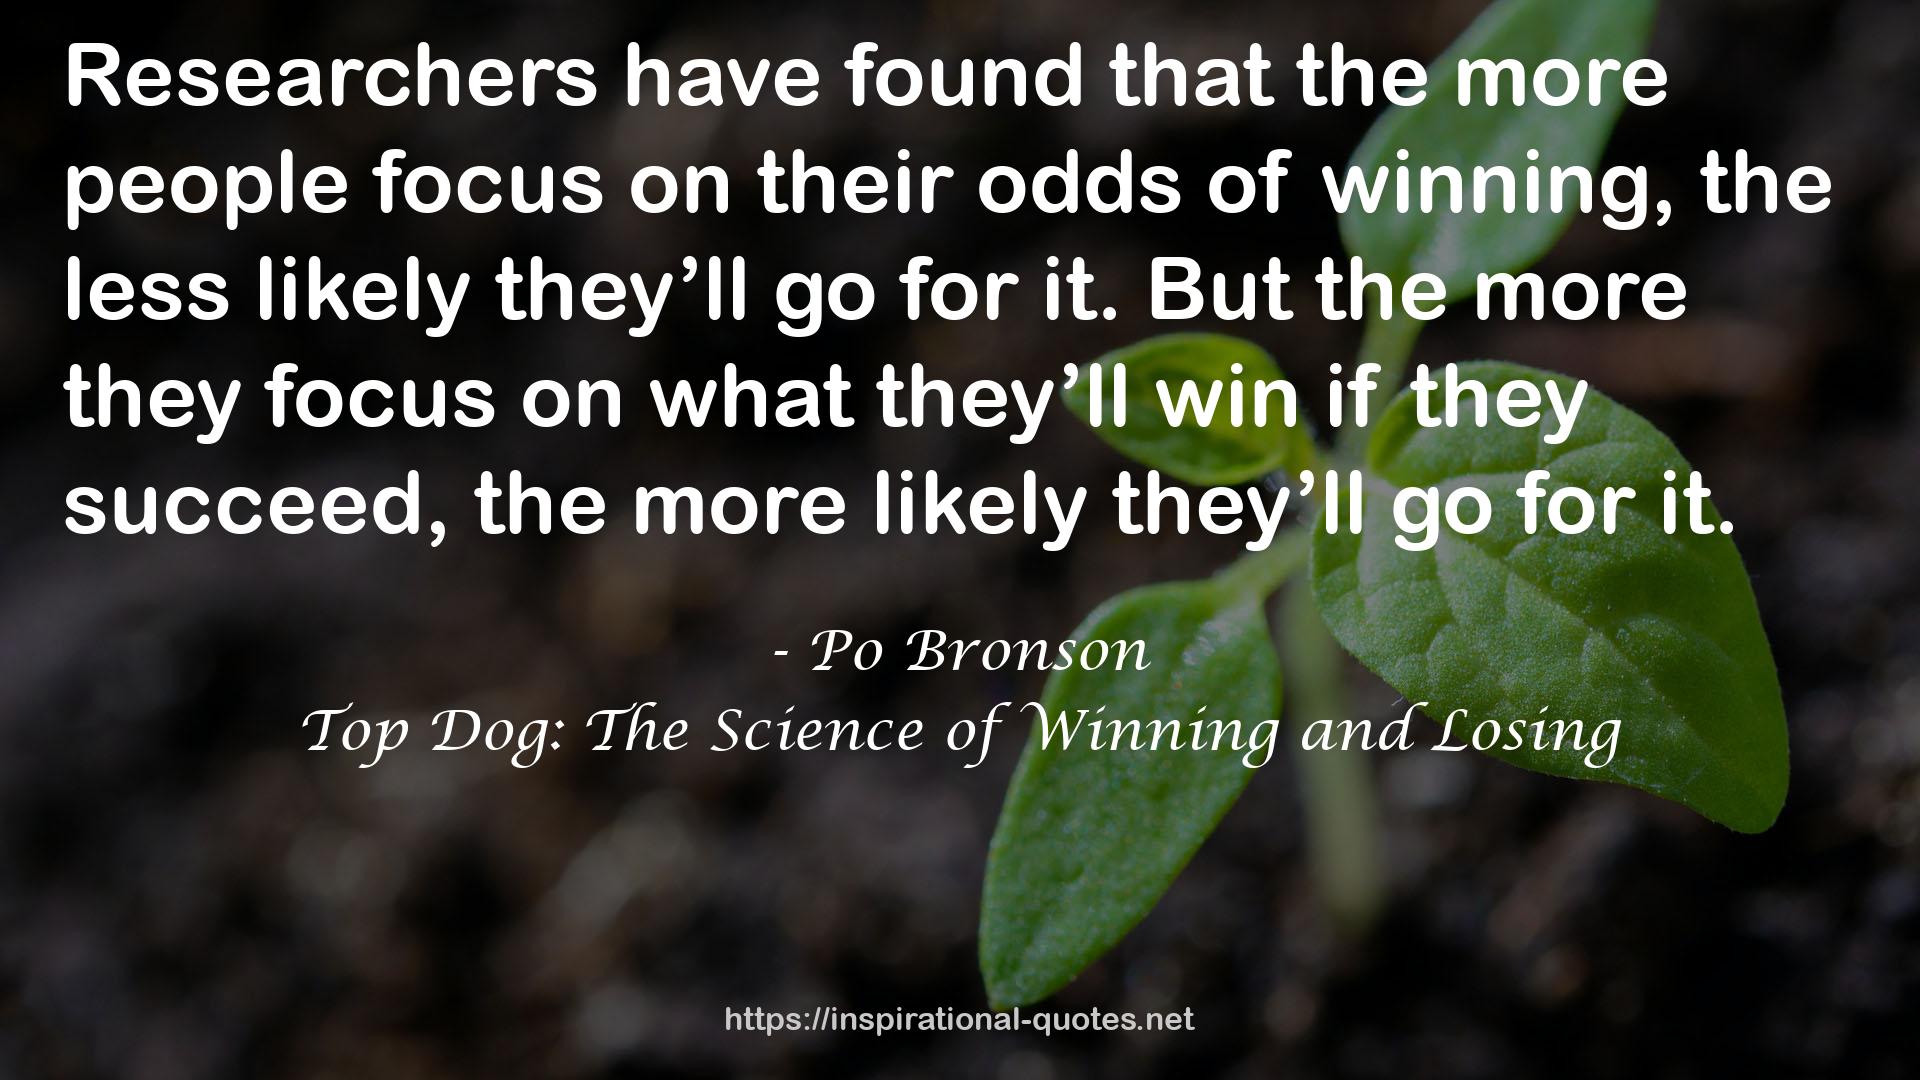 Top Dog: The Science of Winning and Losing QUOTES